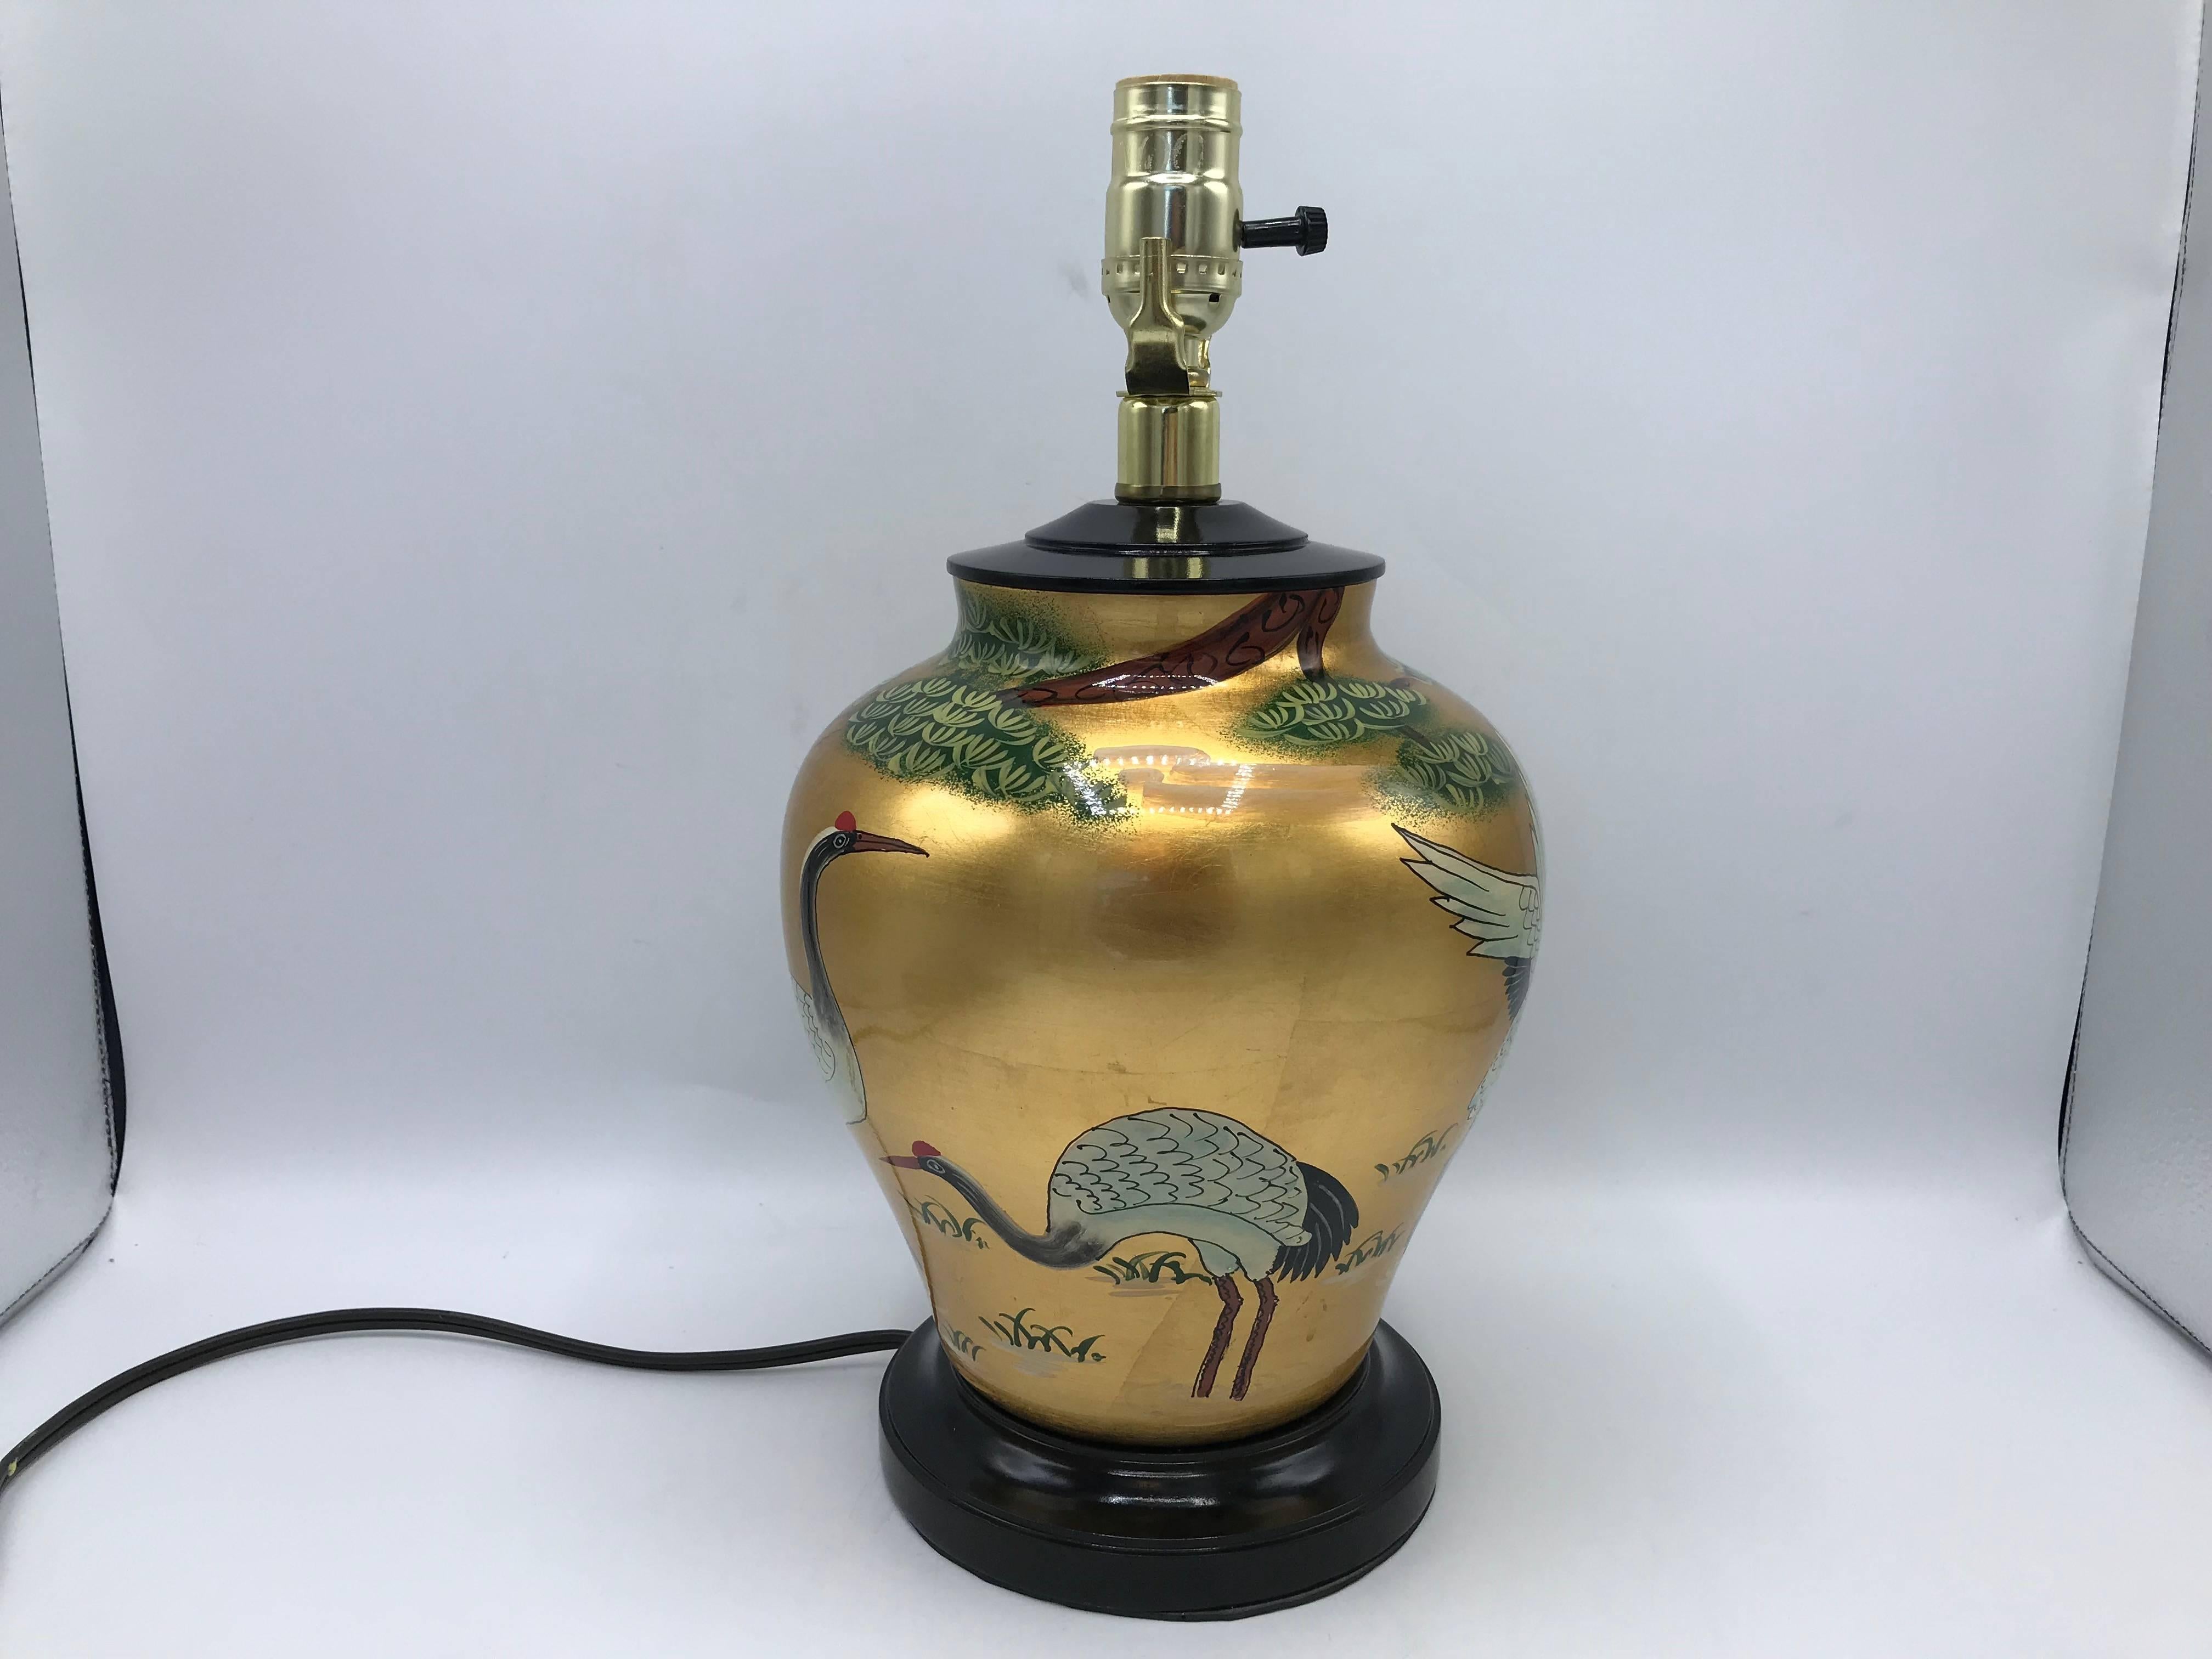 Offered is a fabulous, 1960s black and gold, Chinoiserie table lamp with an ornate lacquered crane motif. Newly rewired.